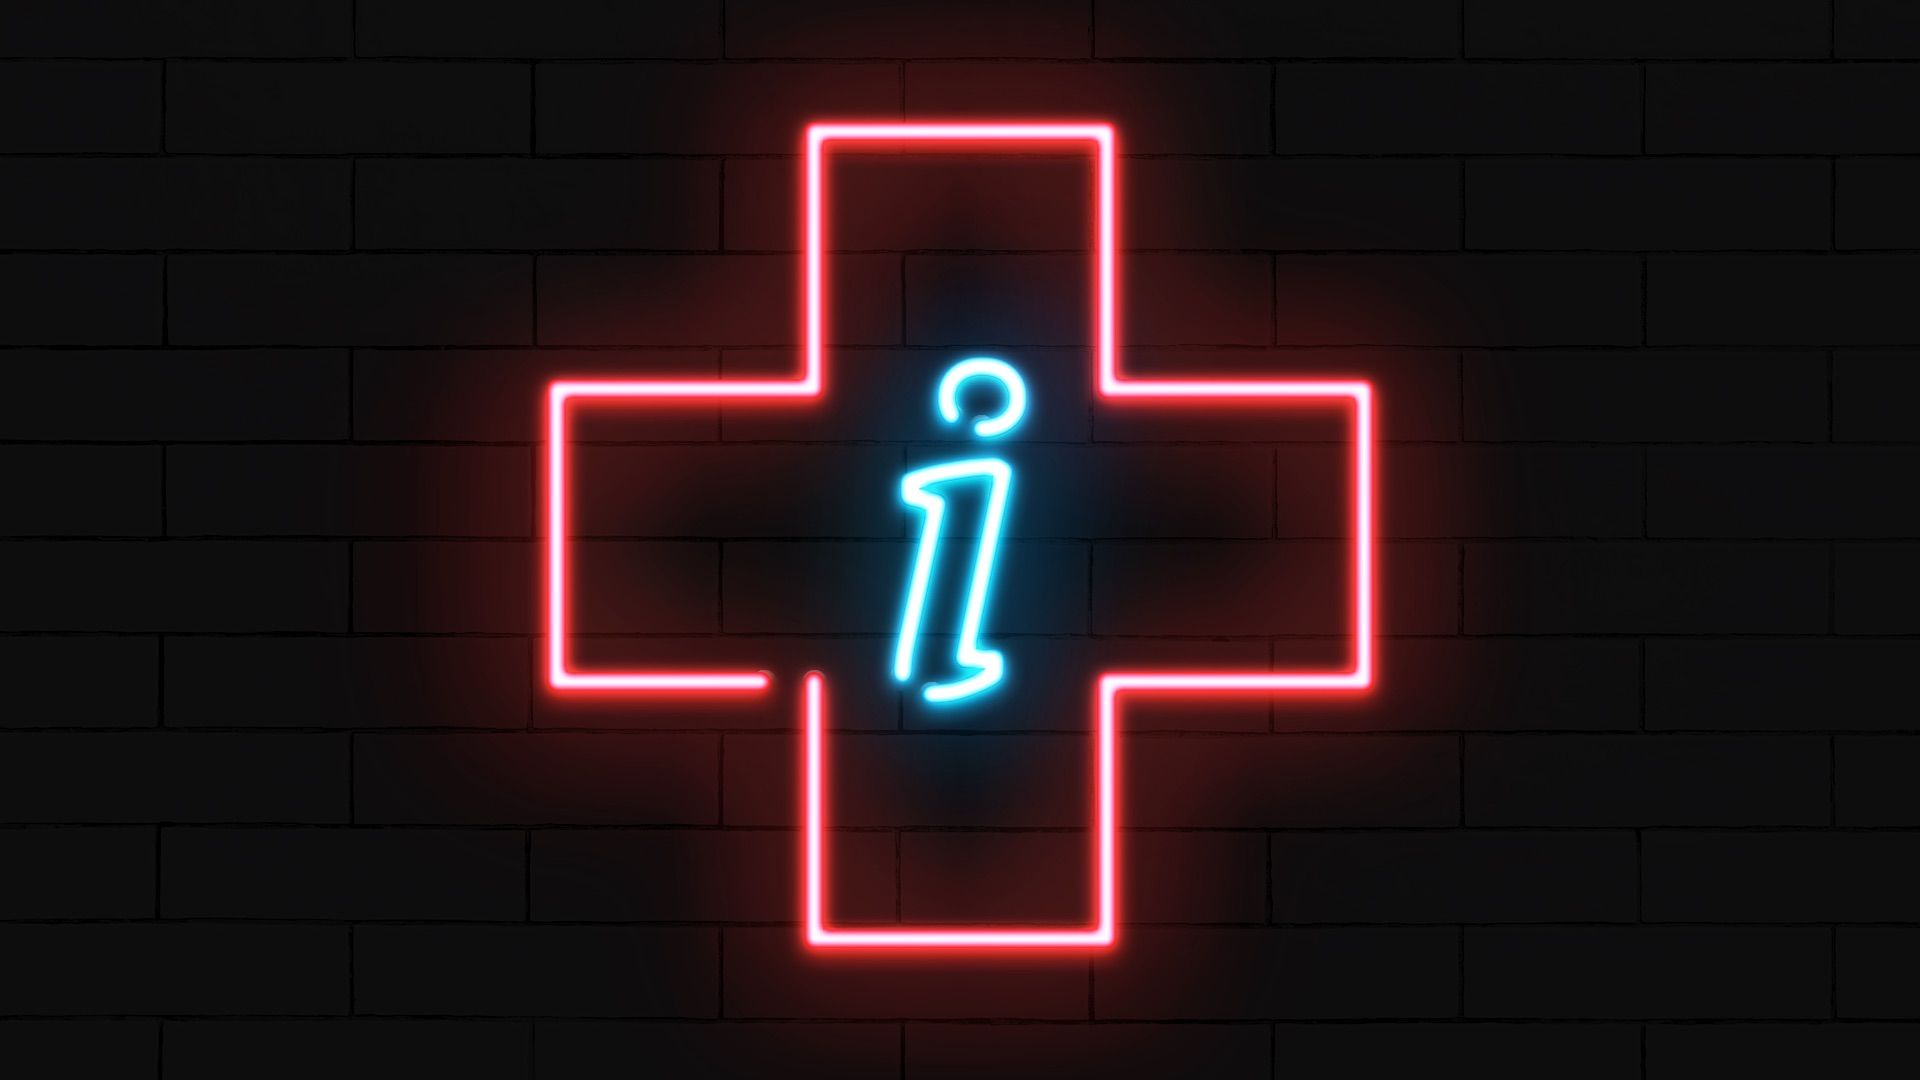 Illustration of a neon sign in the shape of a health plus with an information "i" in the center. 